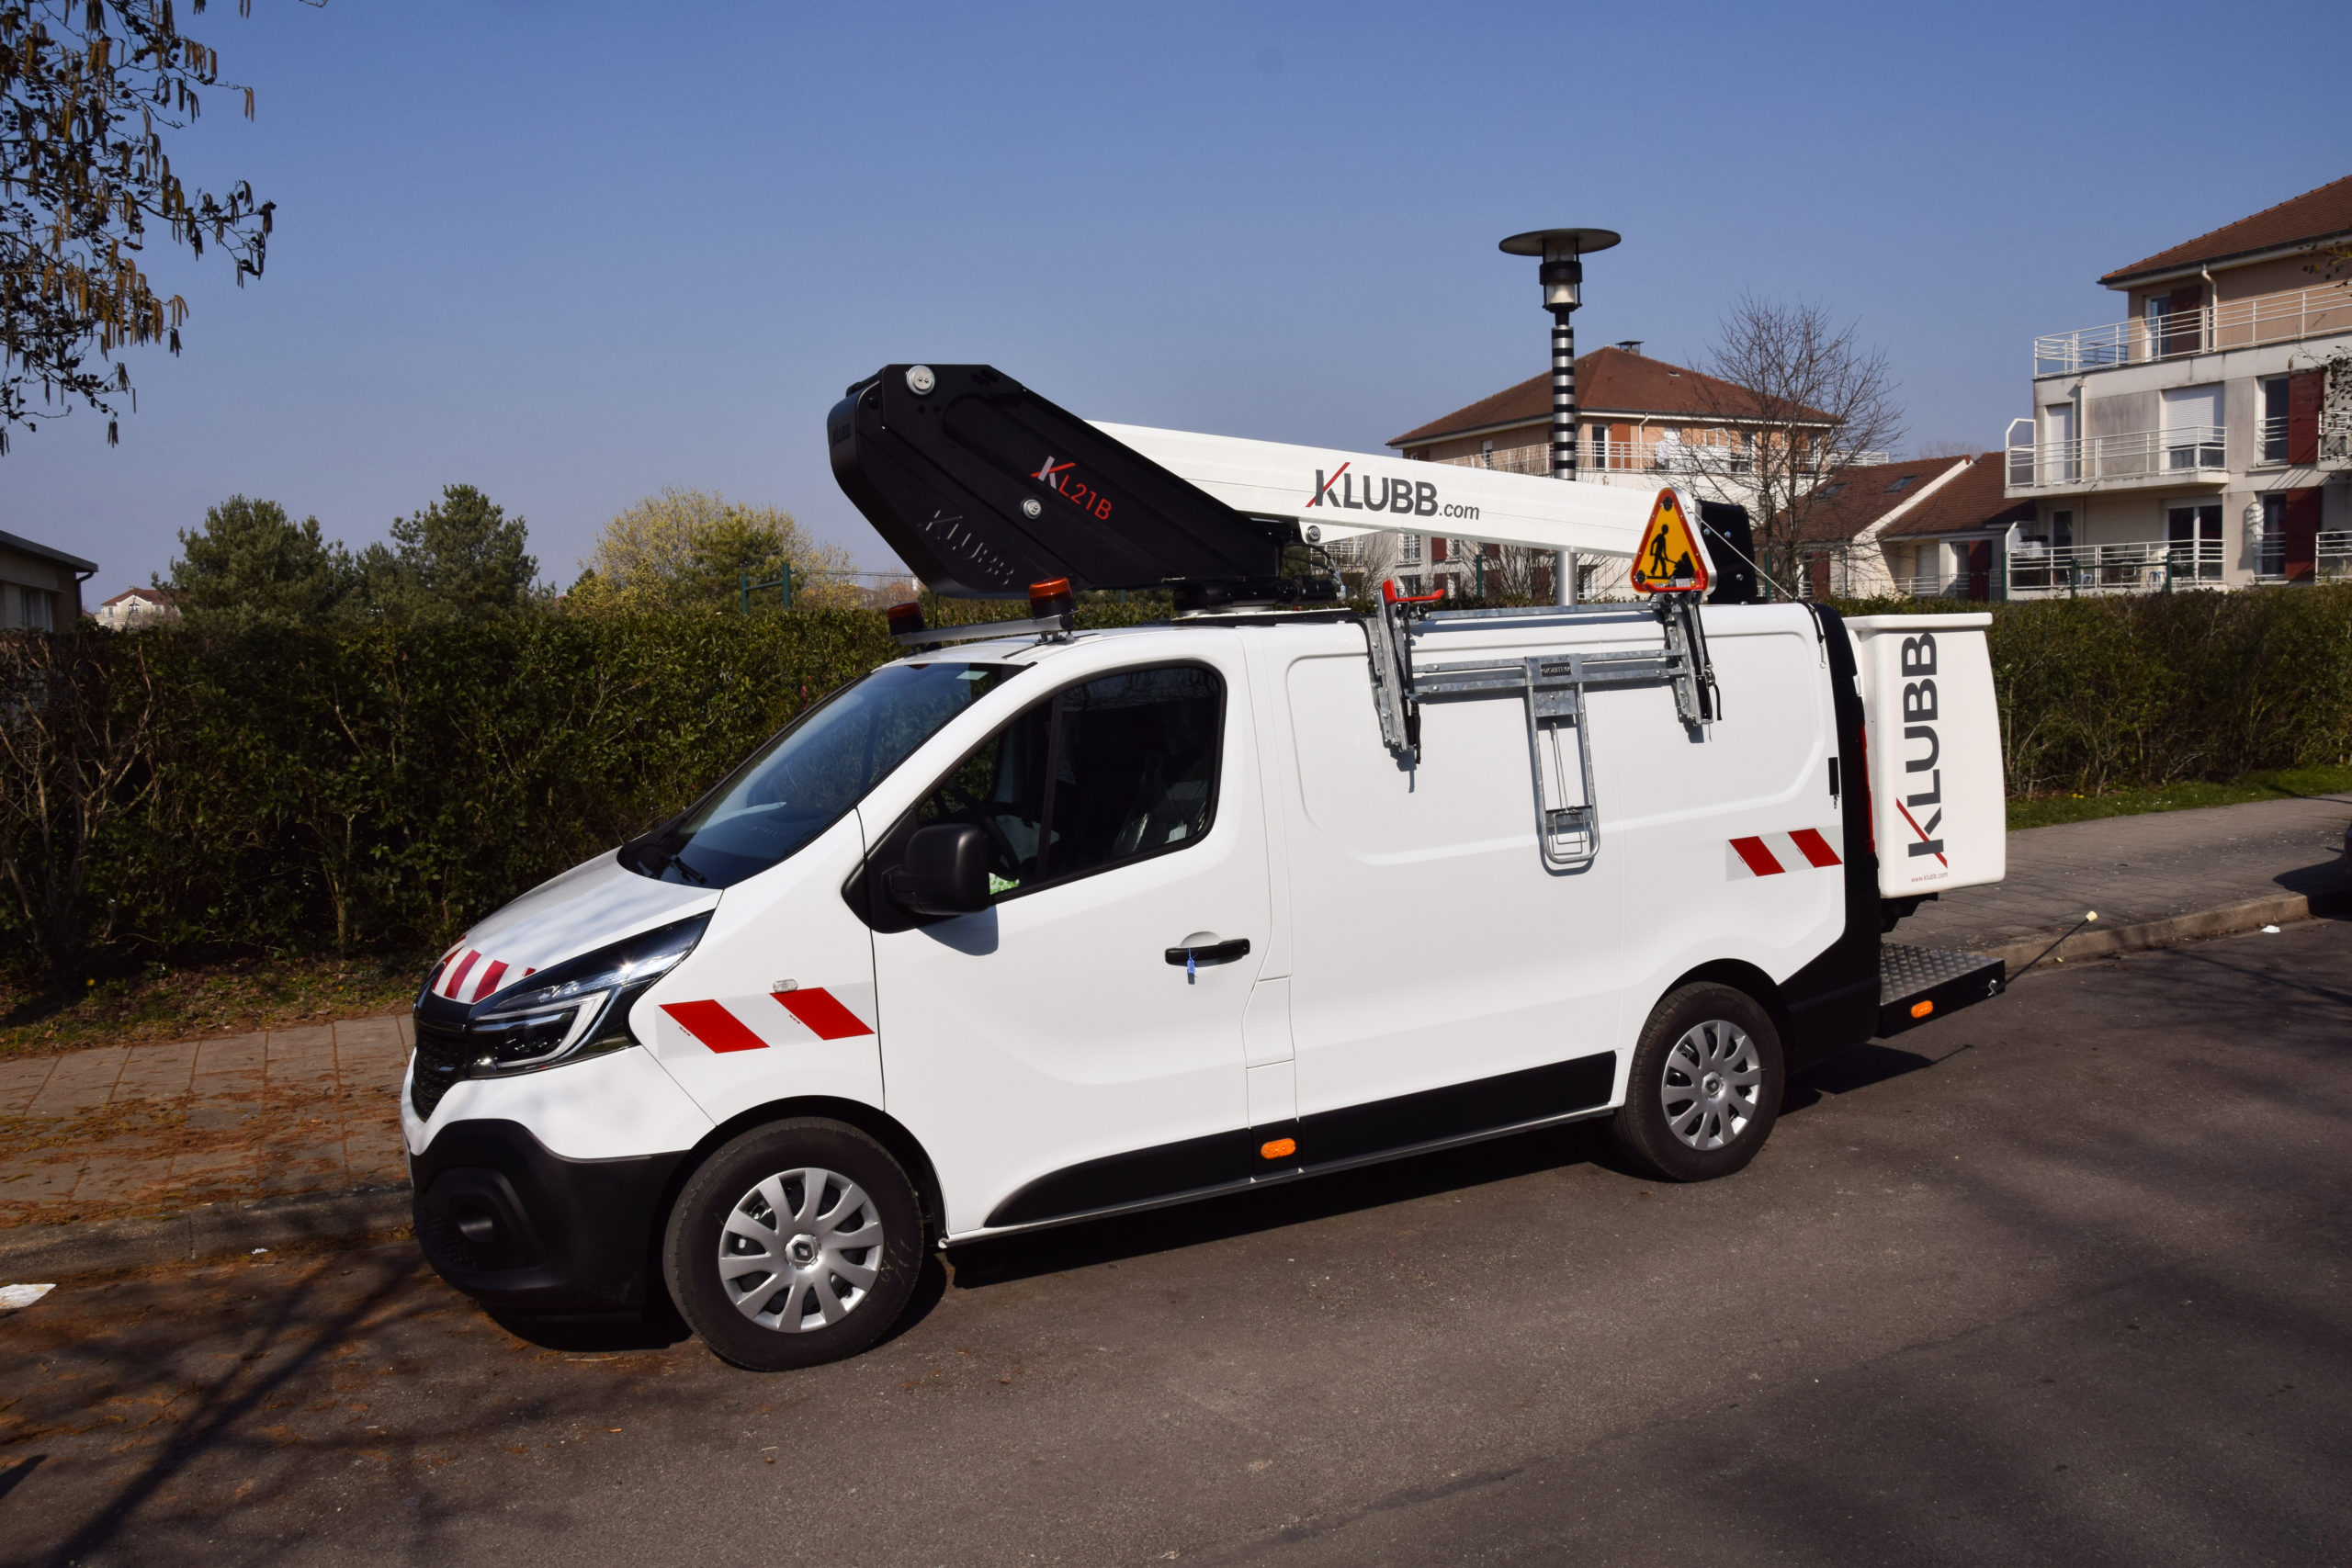 klubb will exhibit its new models of van mounts at the gis fair in italy